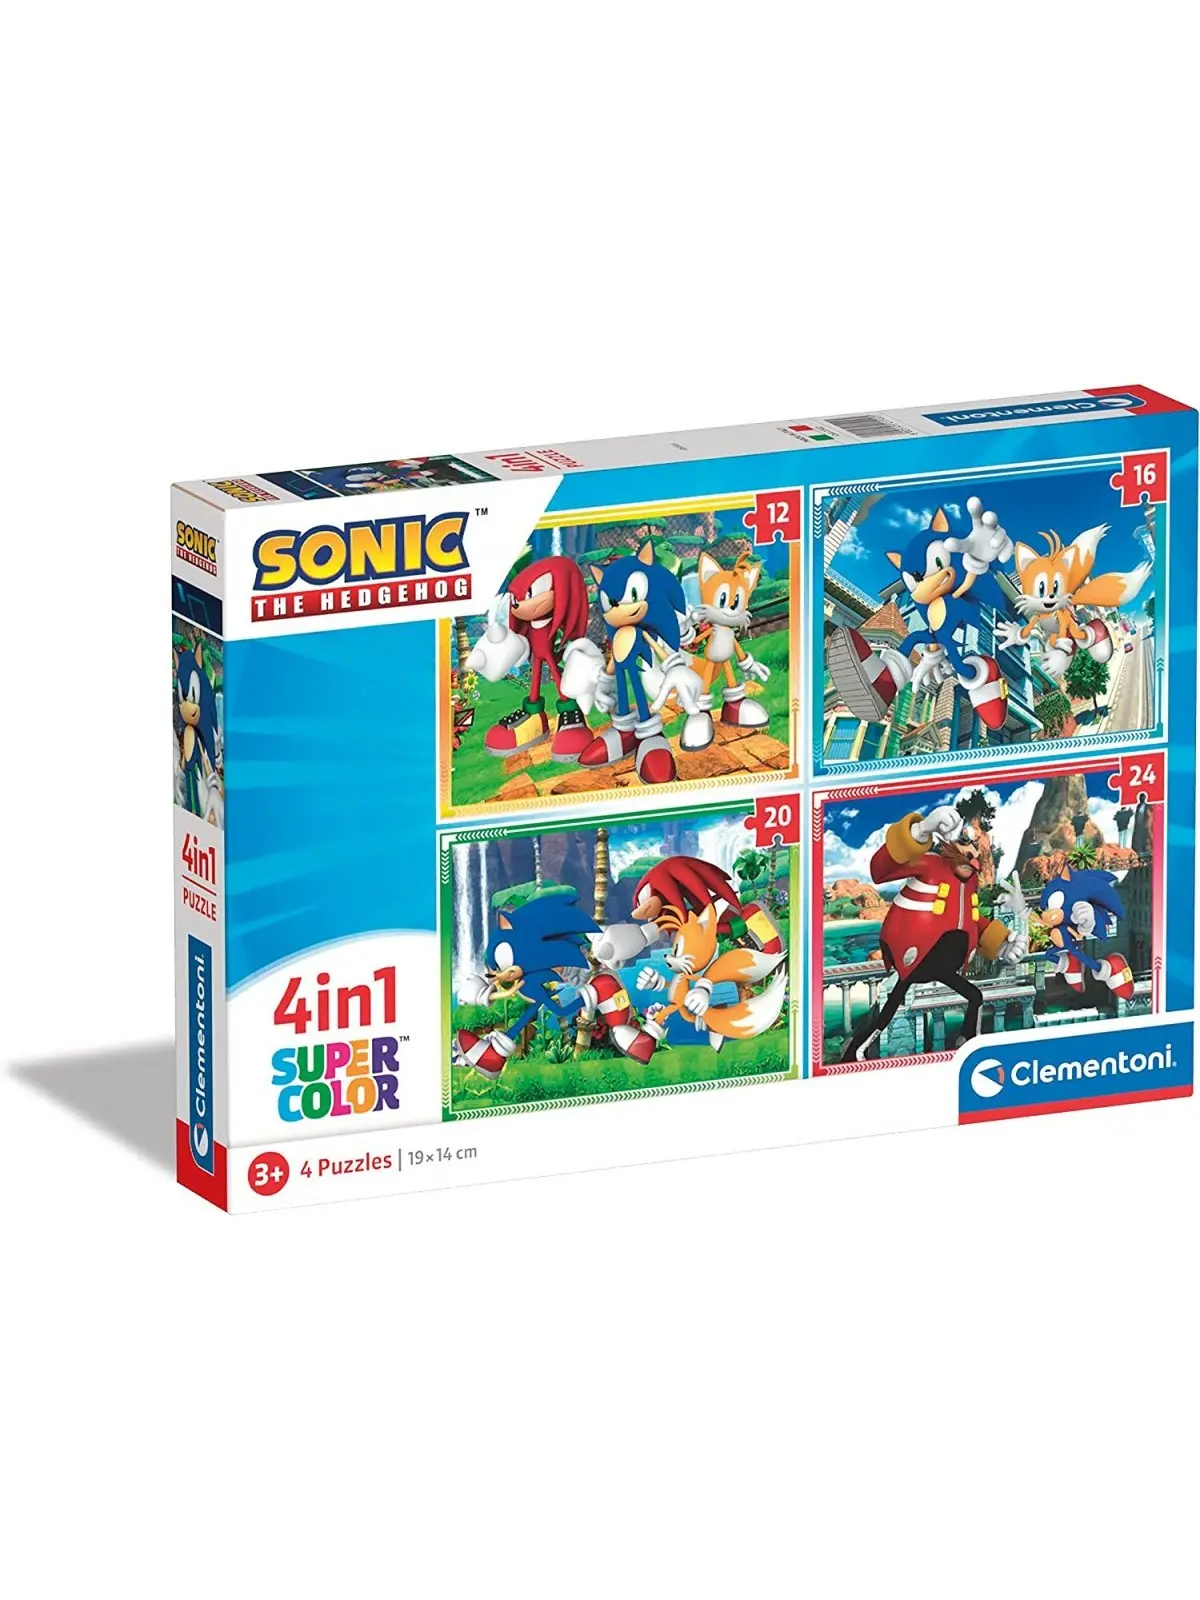 Super Color Puzzle Sonic the Hedgehog 4 in 1